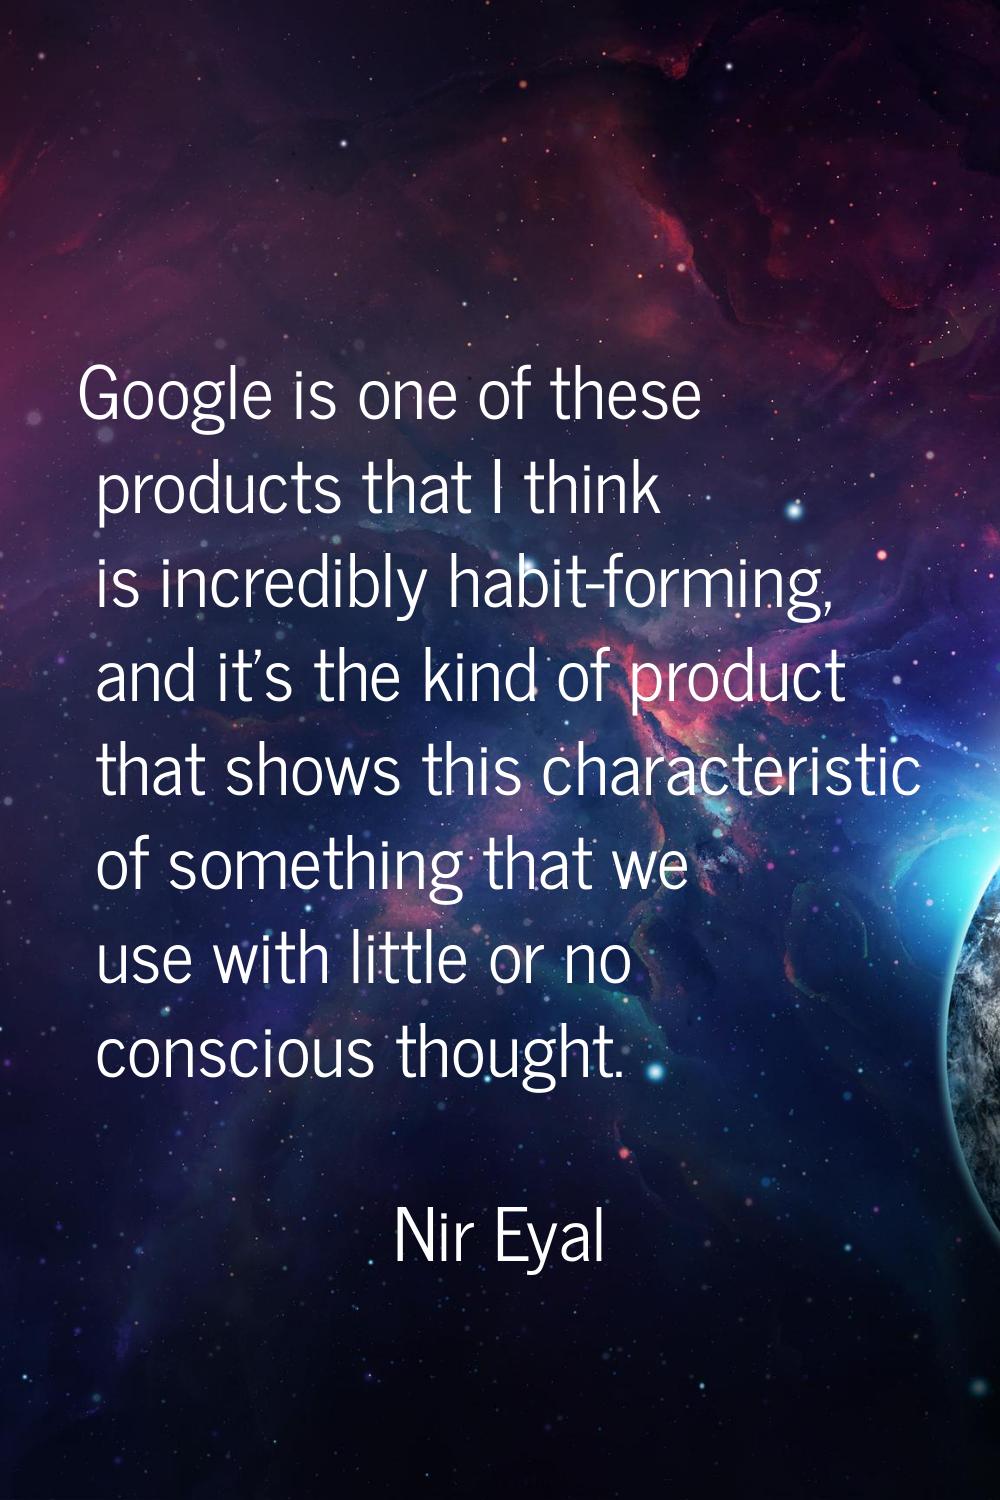 Google is one of these products that I think is incredibly habit-forming, and it's the kind of prod